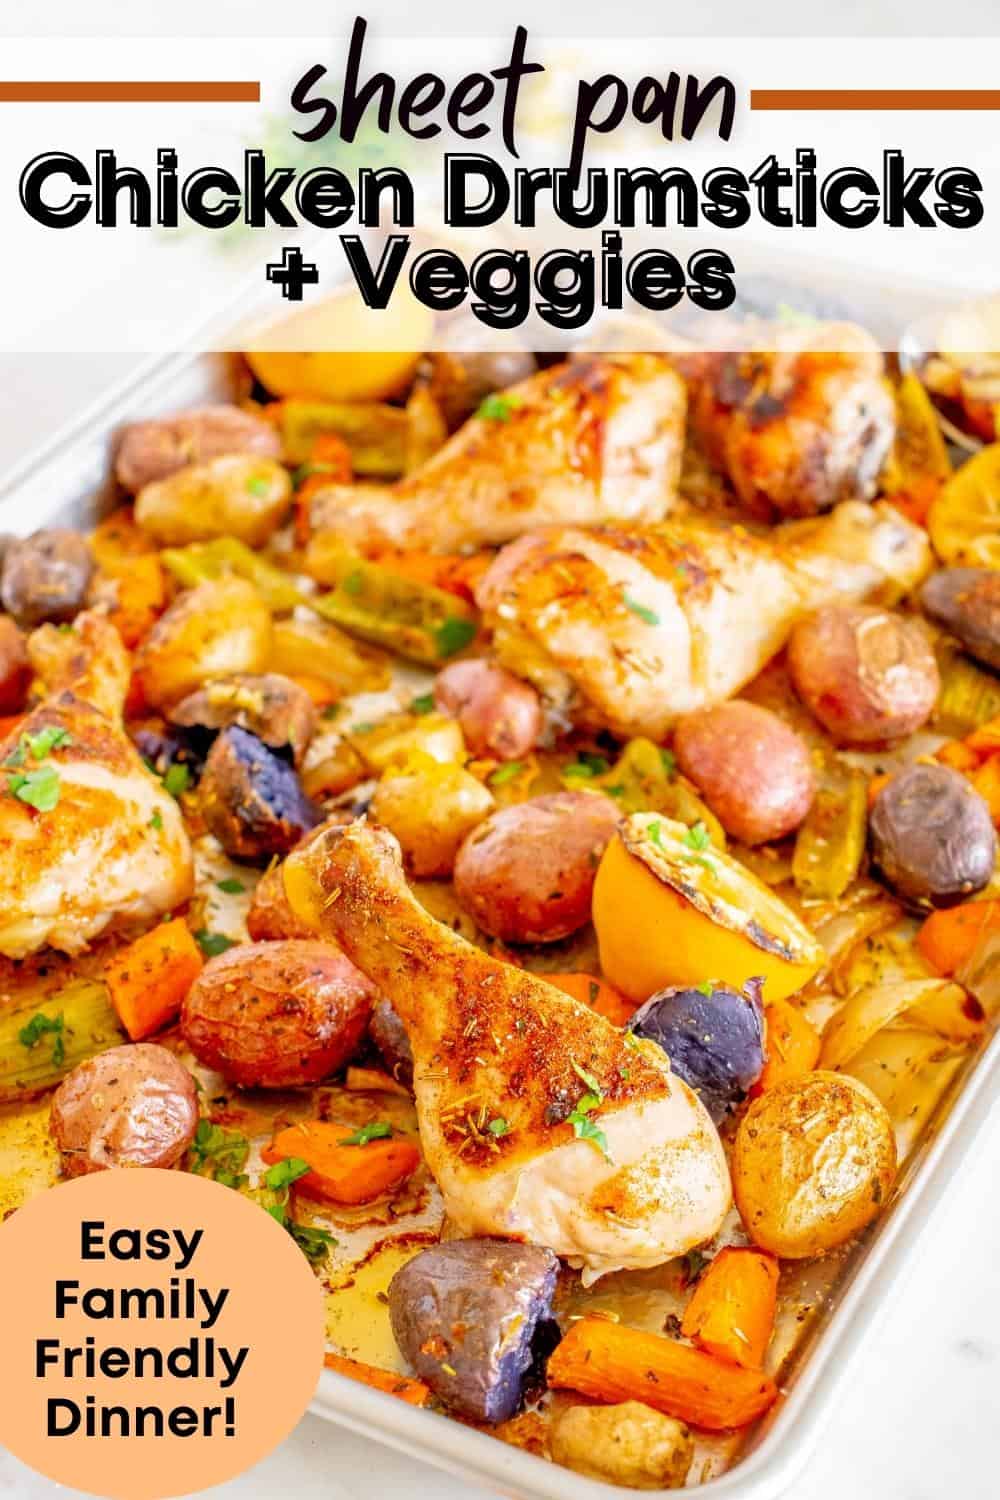 A sheet pan with cooked chicken drumsticks and vegetables, with a text overlay with the name of the recipe.